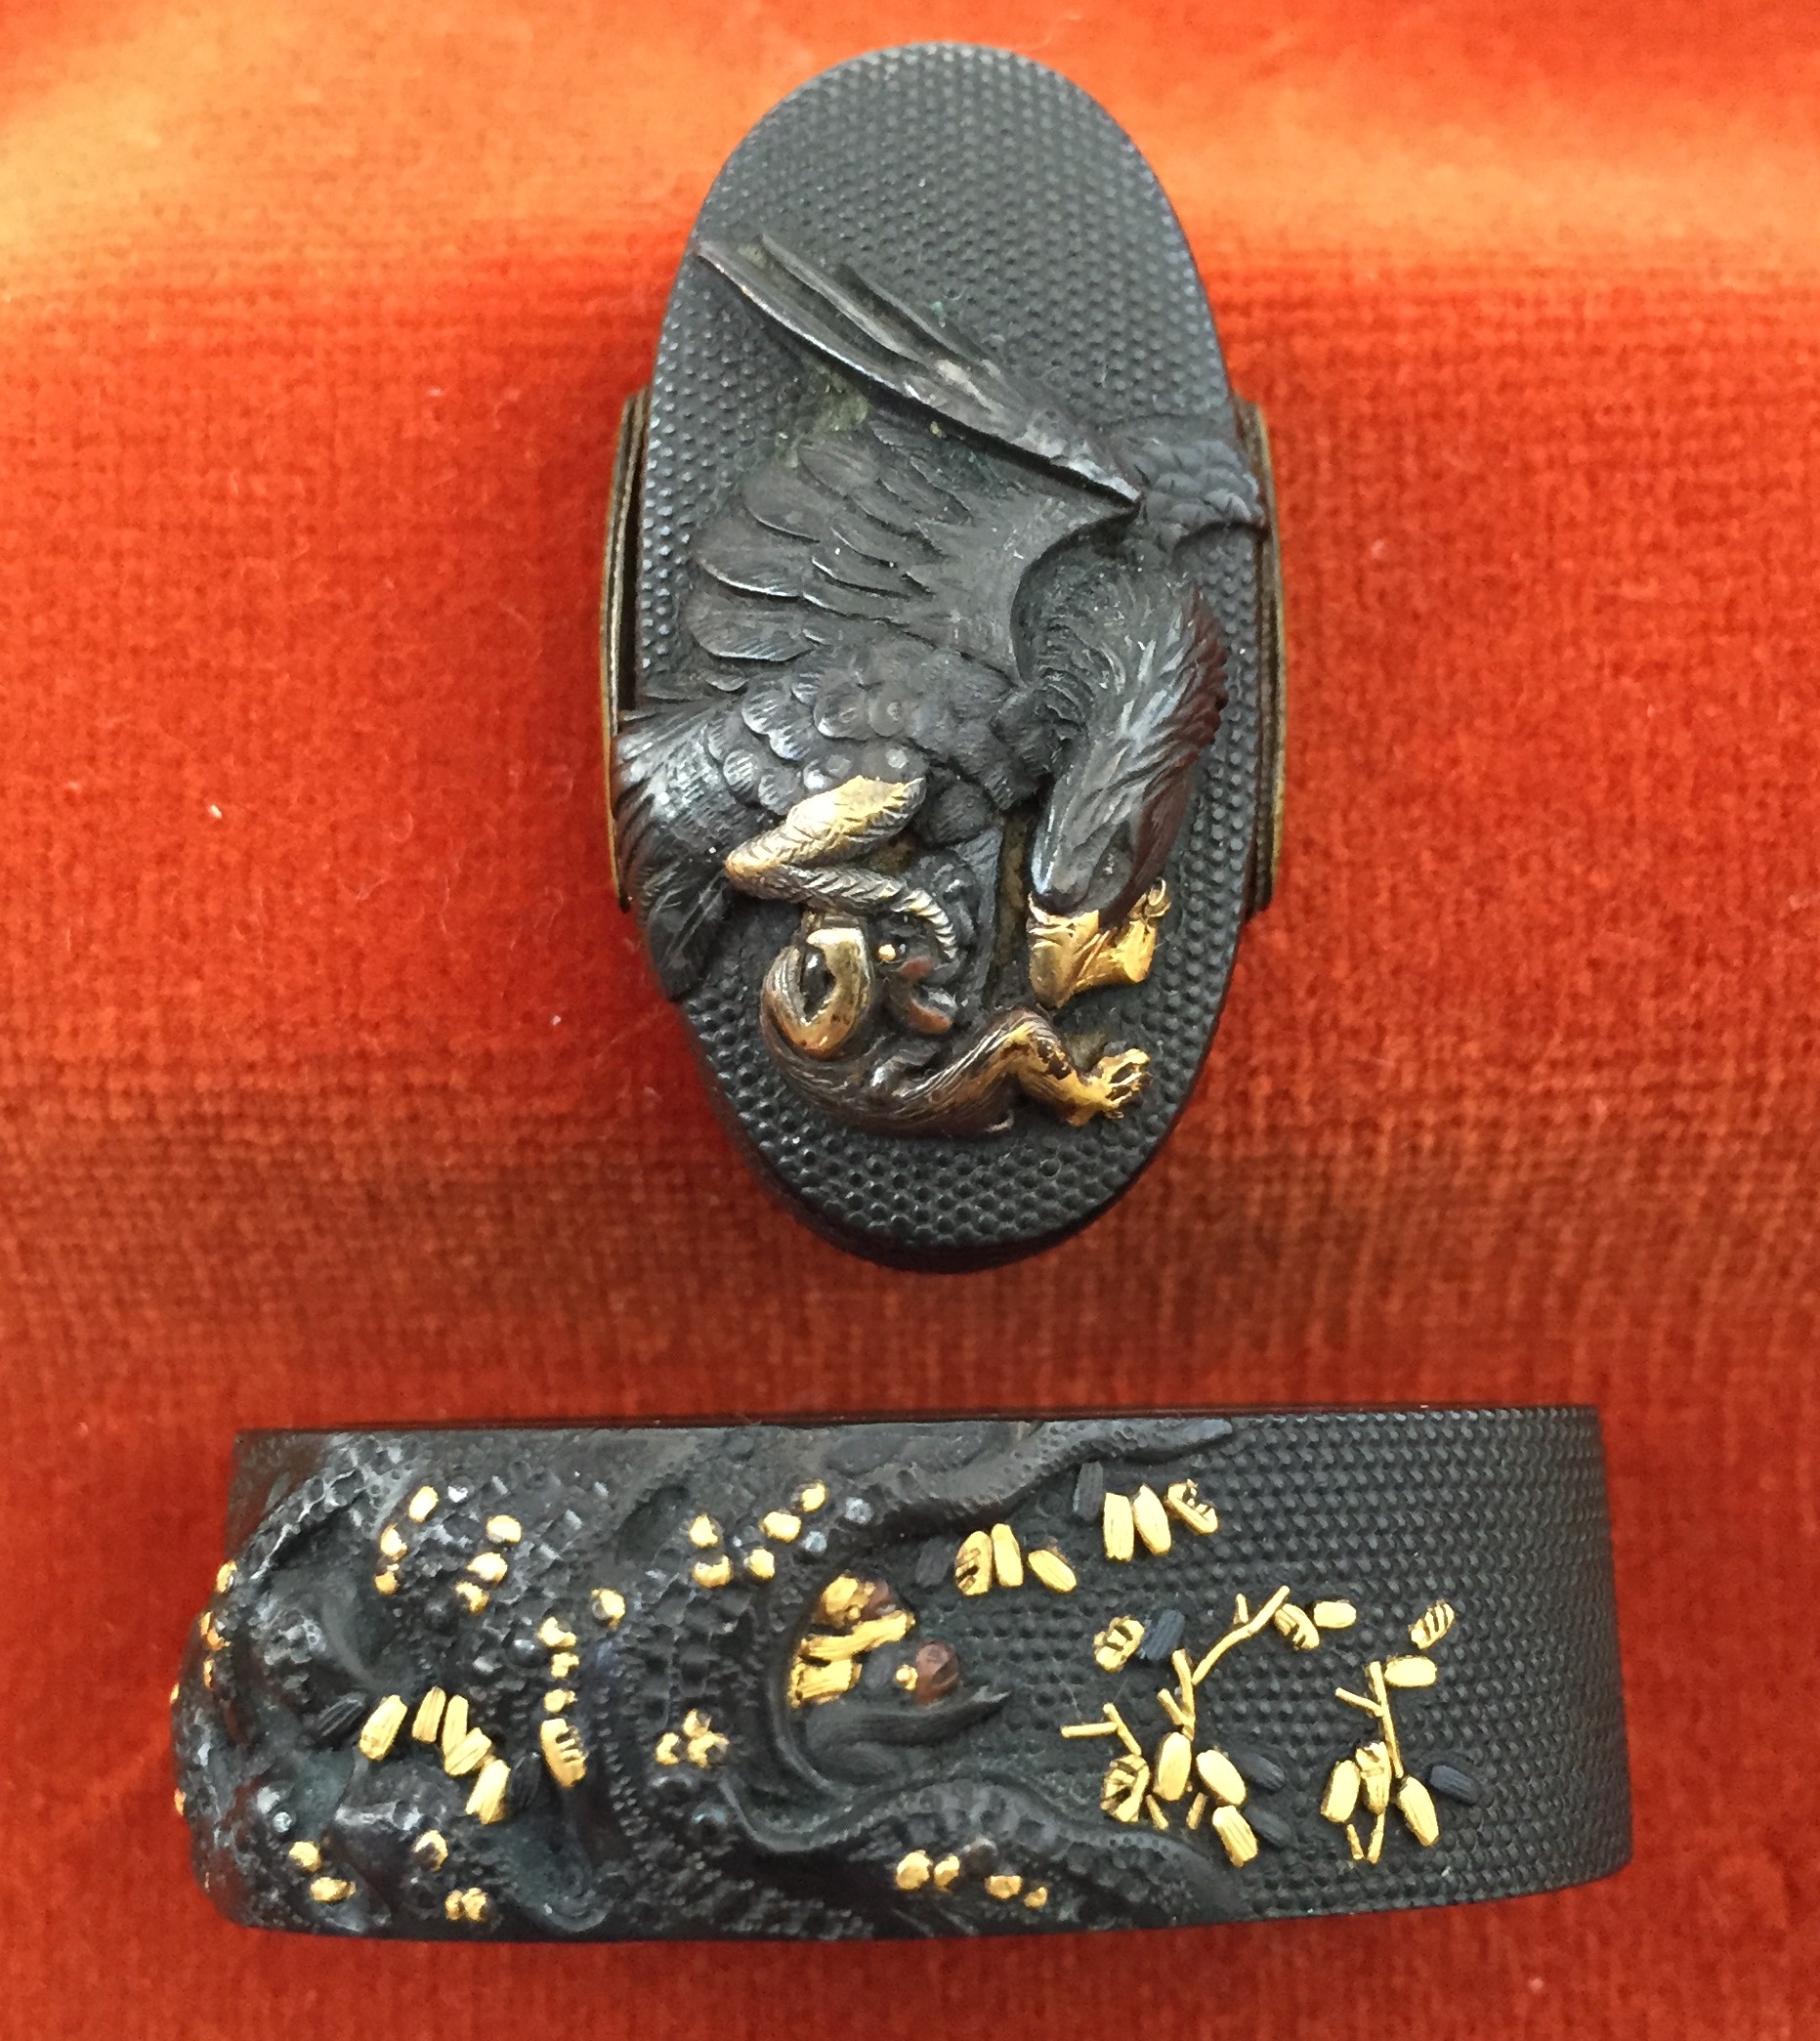 Fuchi-kashira with designs of eagle holding a monkey, and young monkey sheltering under a tree.